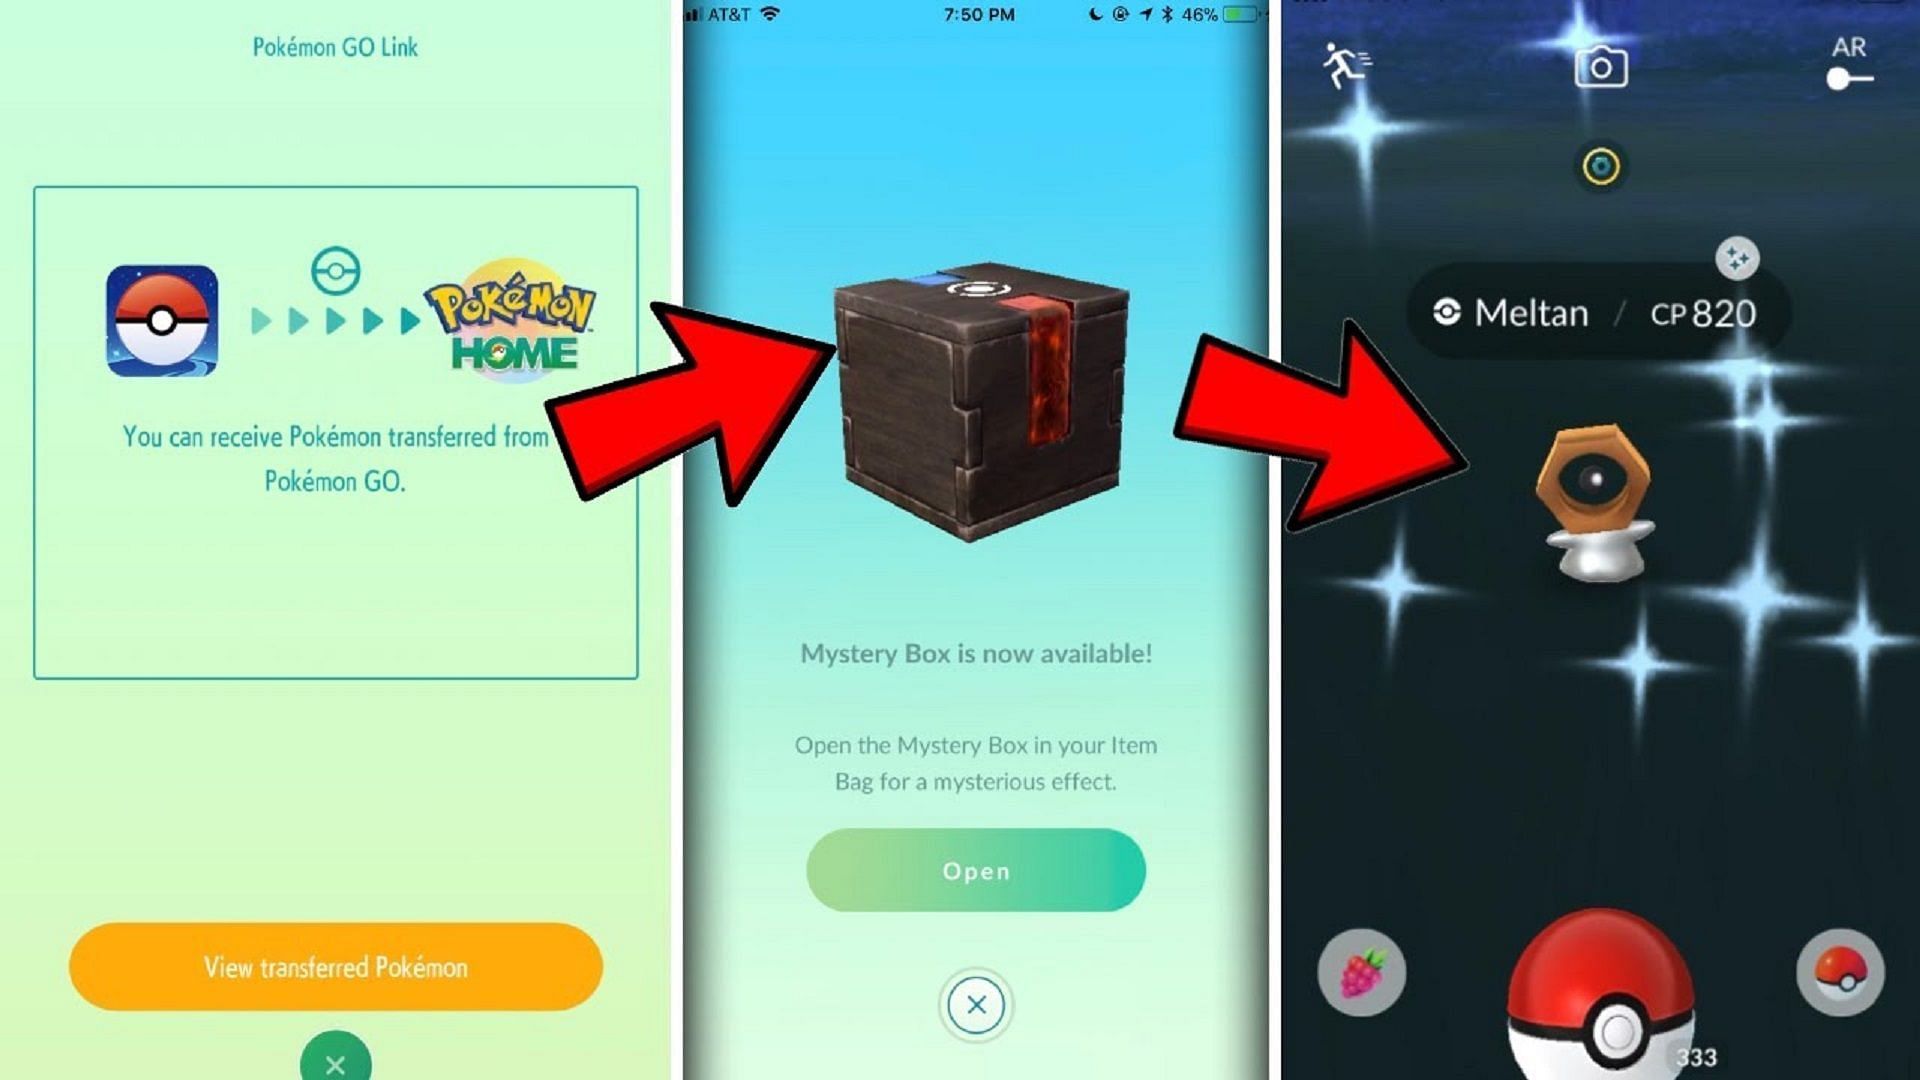 How To Get Mythical Pokemon from the Mystery Box For Free